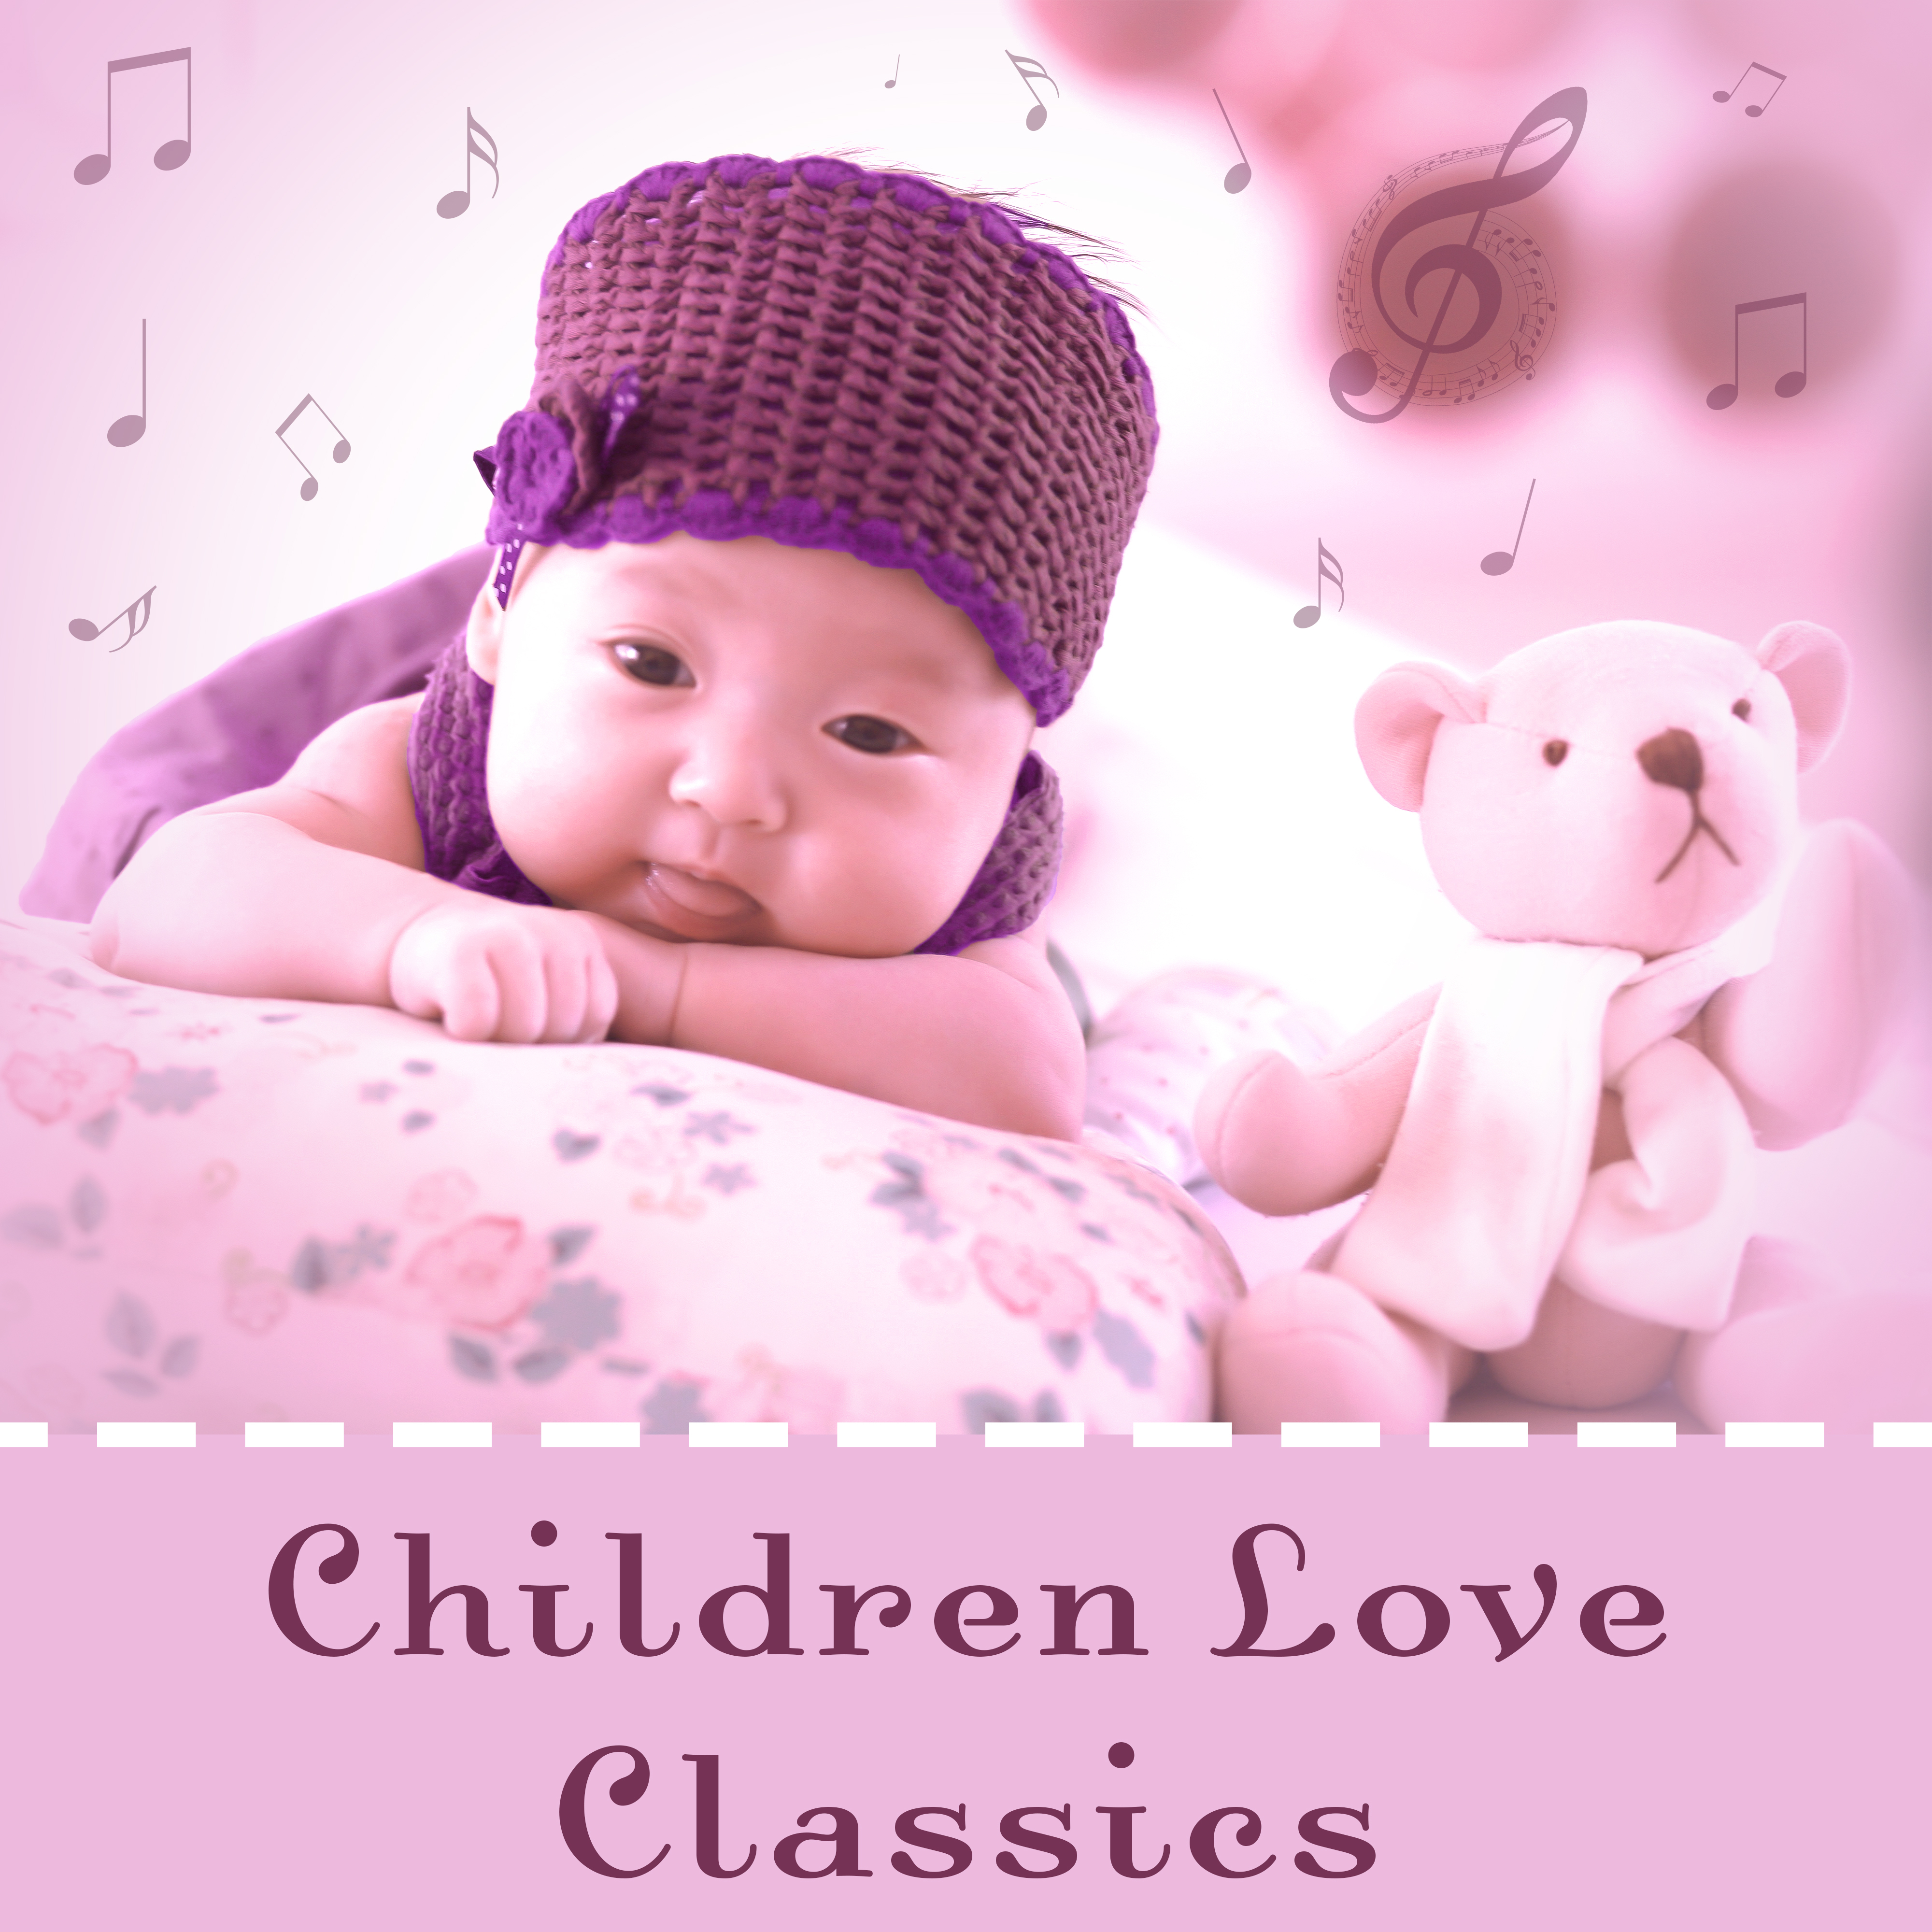 Children Love Classics – Instrumental Music for Baby, Educational Songs, Einstein Effect, Growing Brain, Mozart, Beethoven